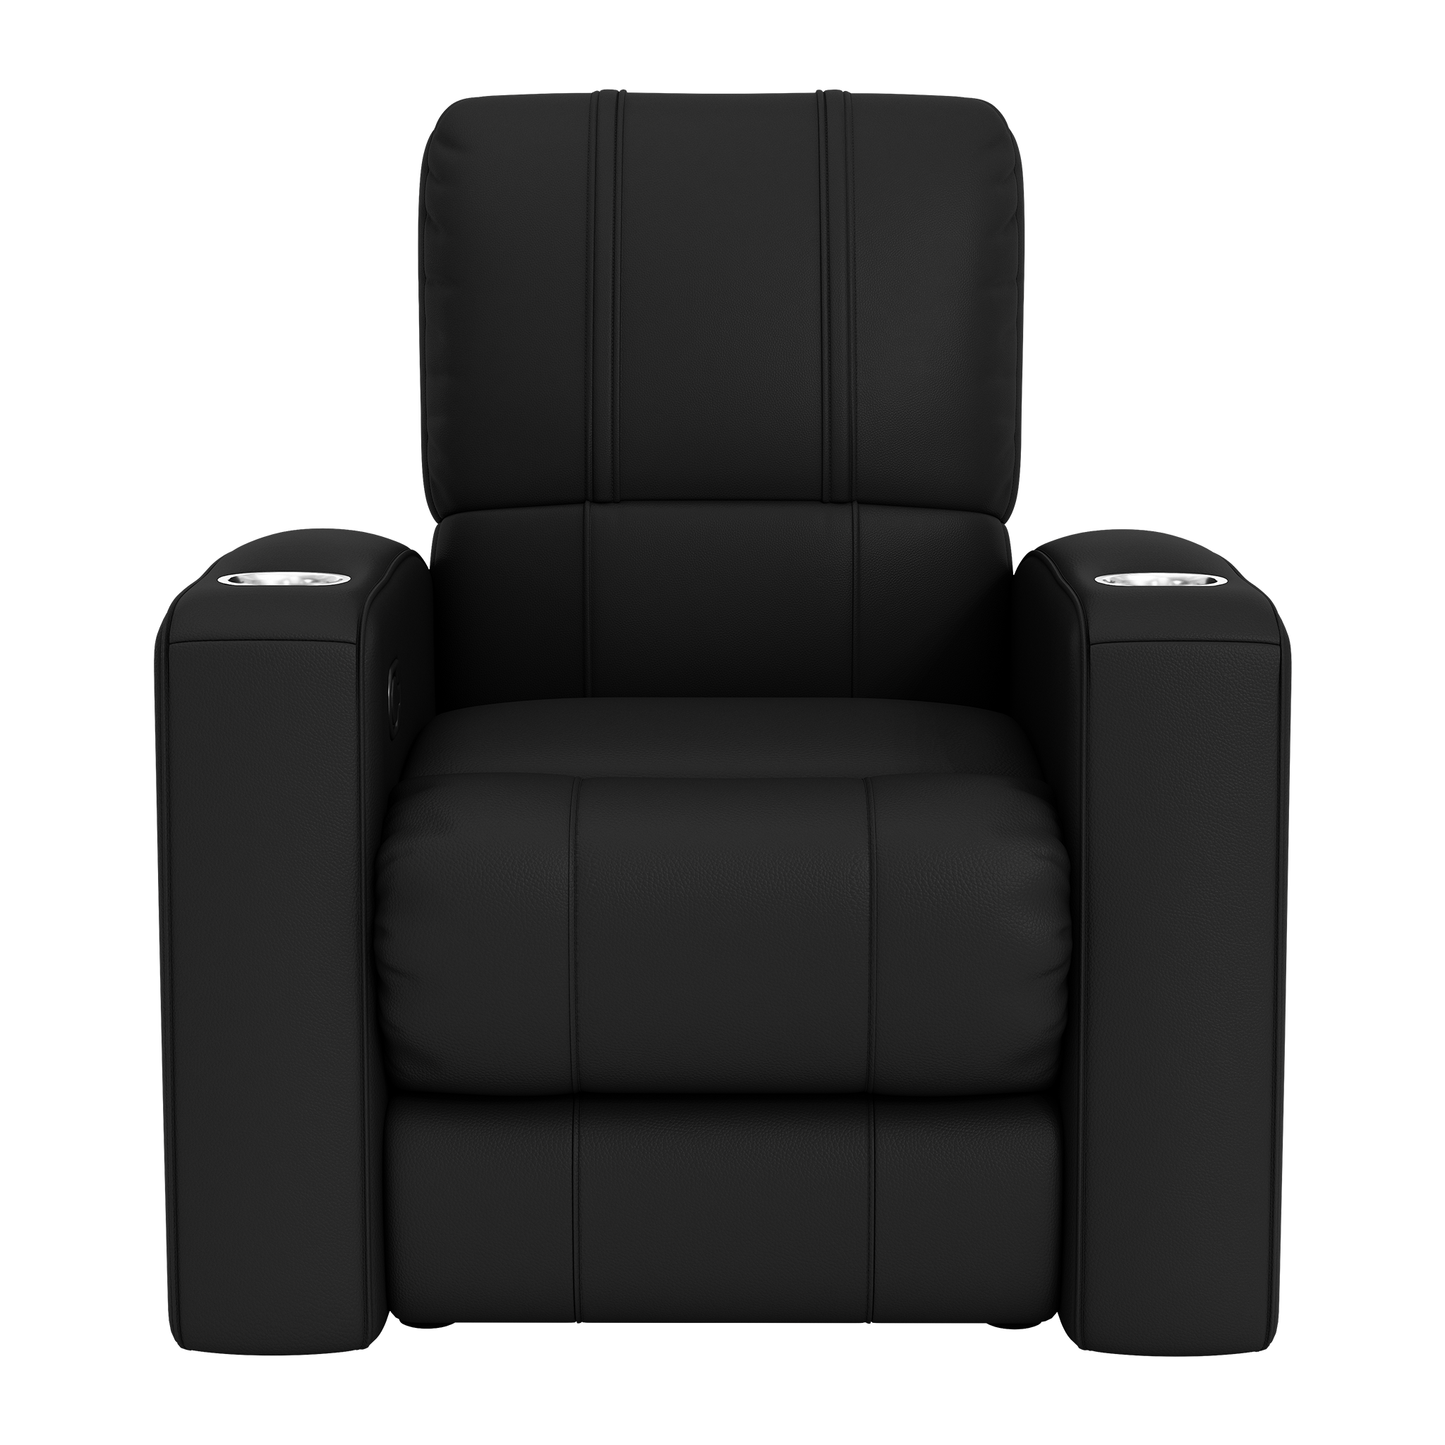 Relax Home Theater Recliner with Shoulda Been Stars Icon Logo